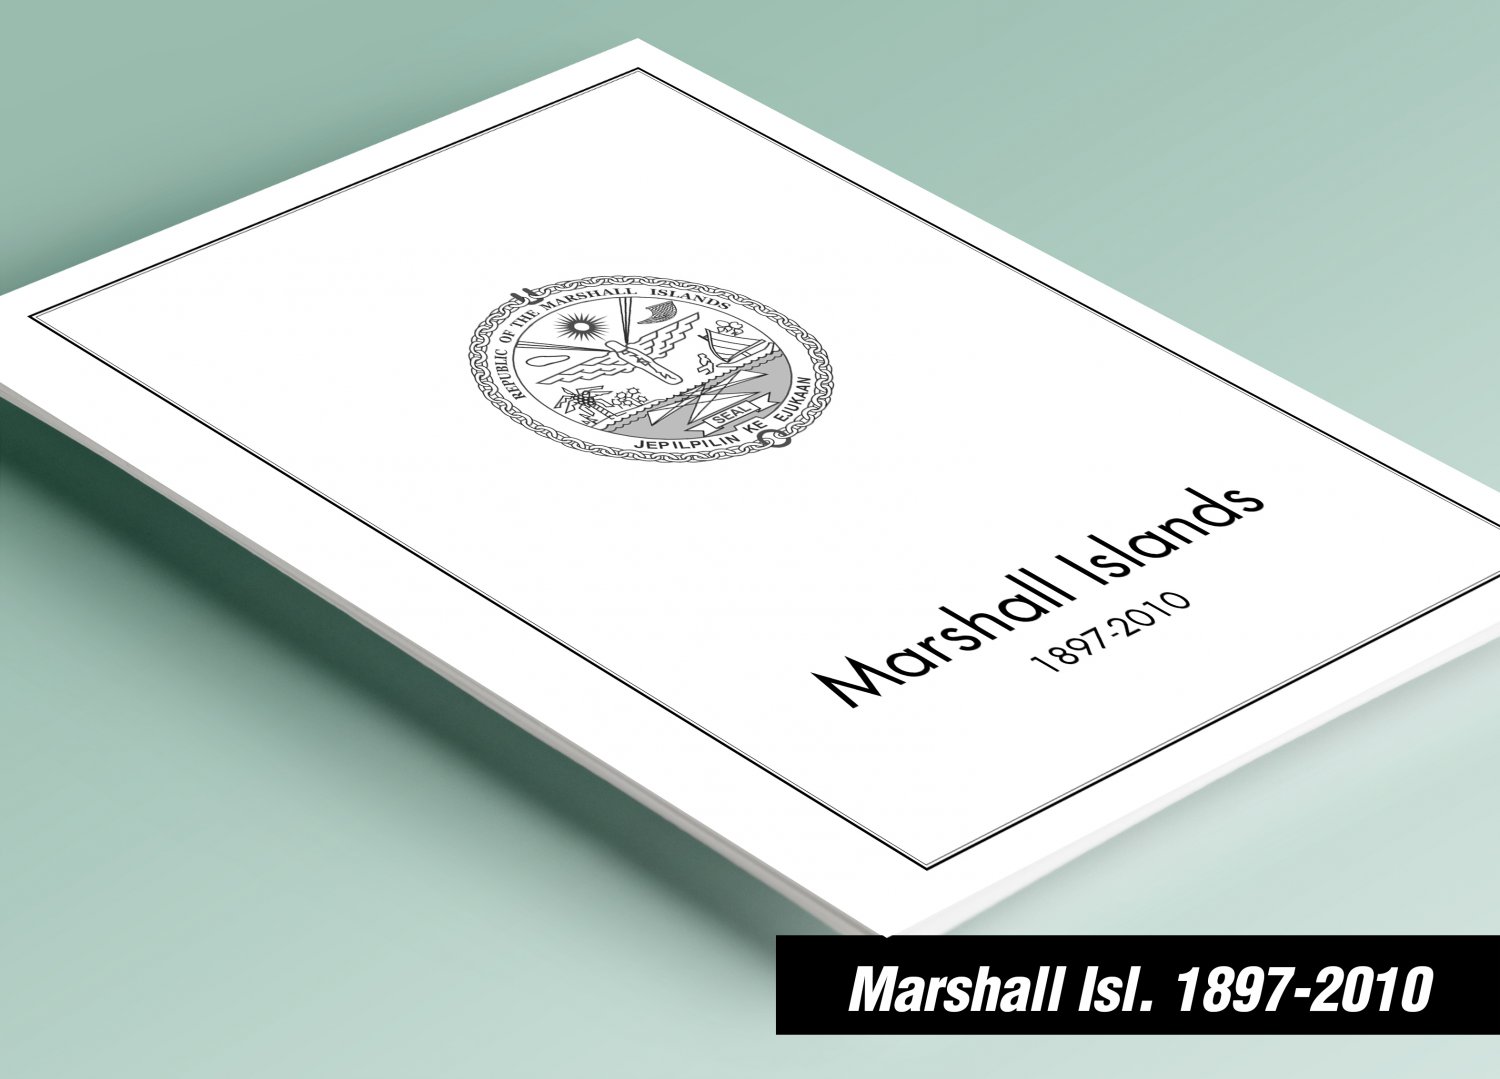 PRINTED MARSHALL ISLANDS 1897-2010 STAMP ALBUM PAGES (232 pages)